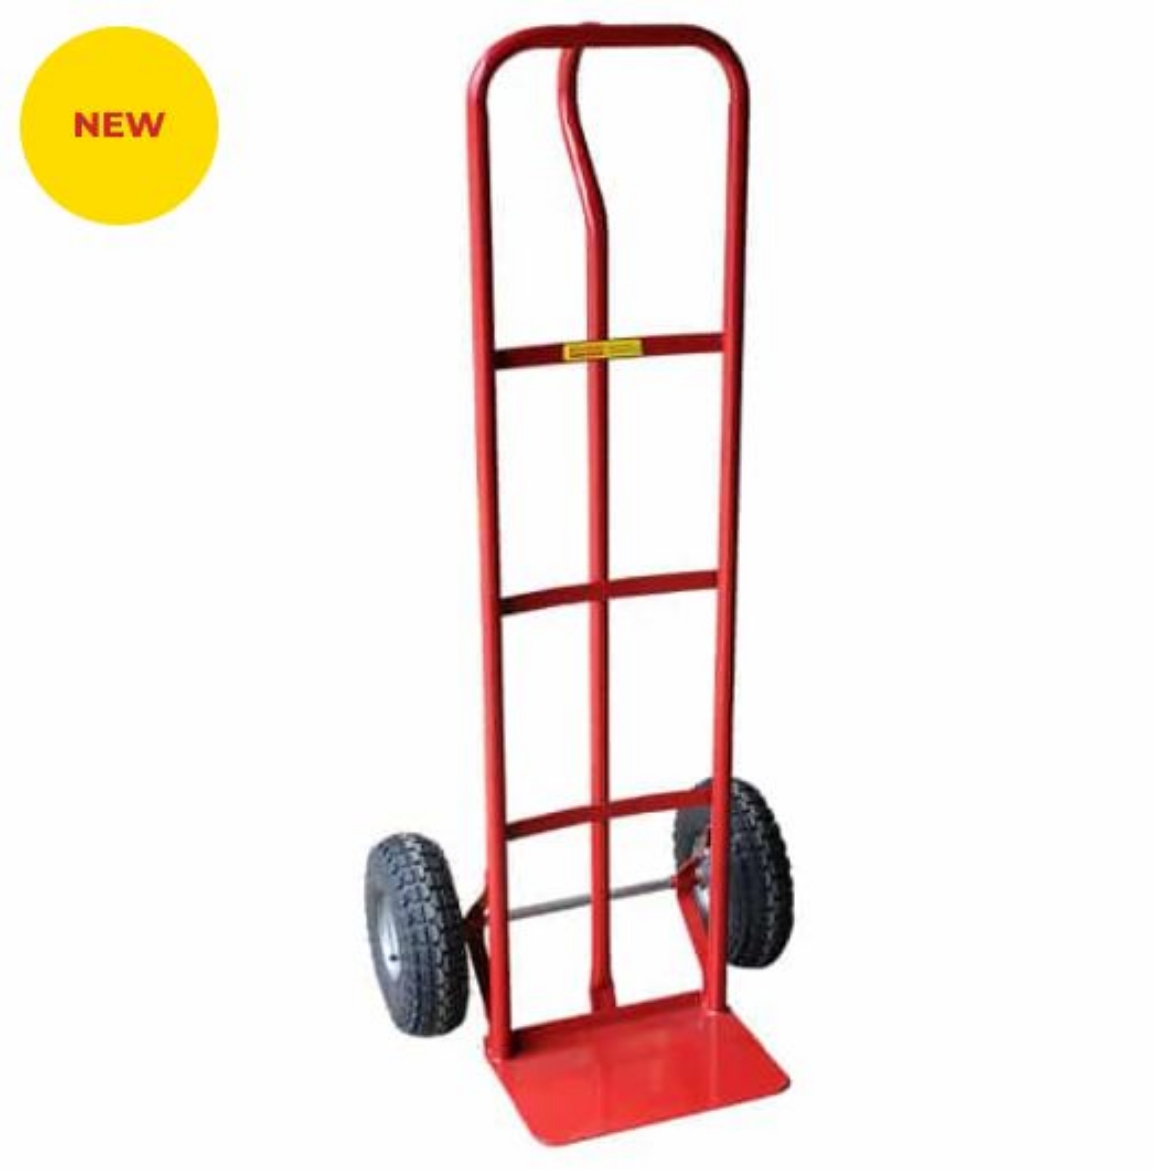 Picture of HAND TROLLEY P Handle Pneumatic Red 200KG Cap. 1320mm X 350mm (PHR200) - Replaces PHR103